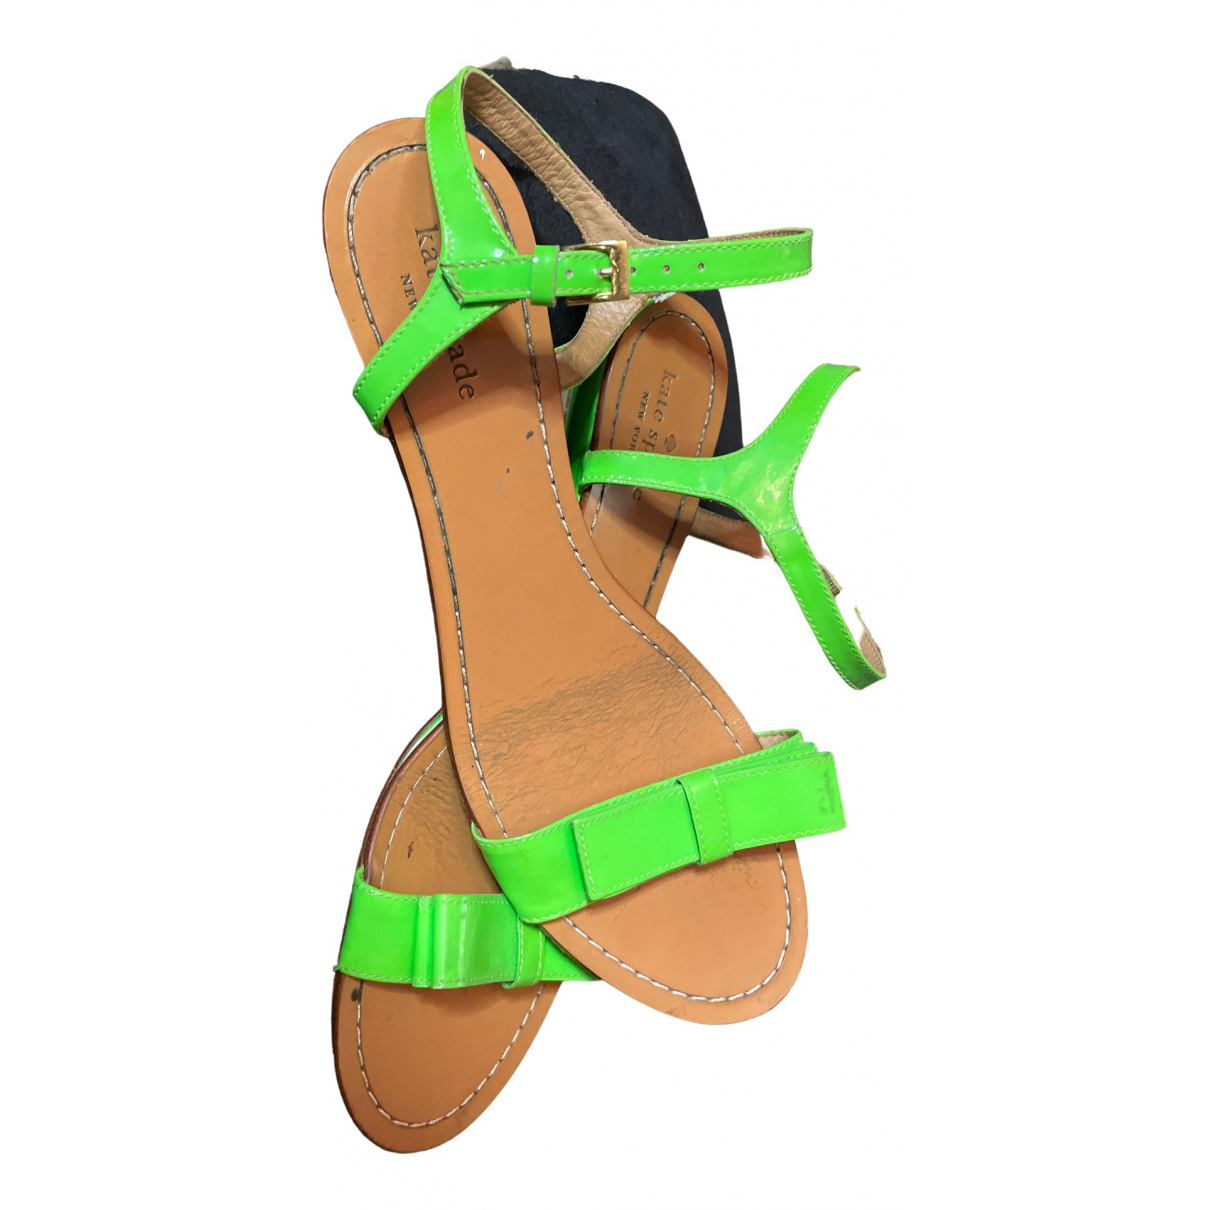 Patent New arrival leather sandal lowest price